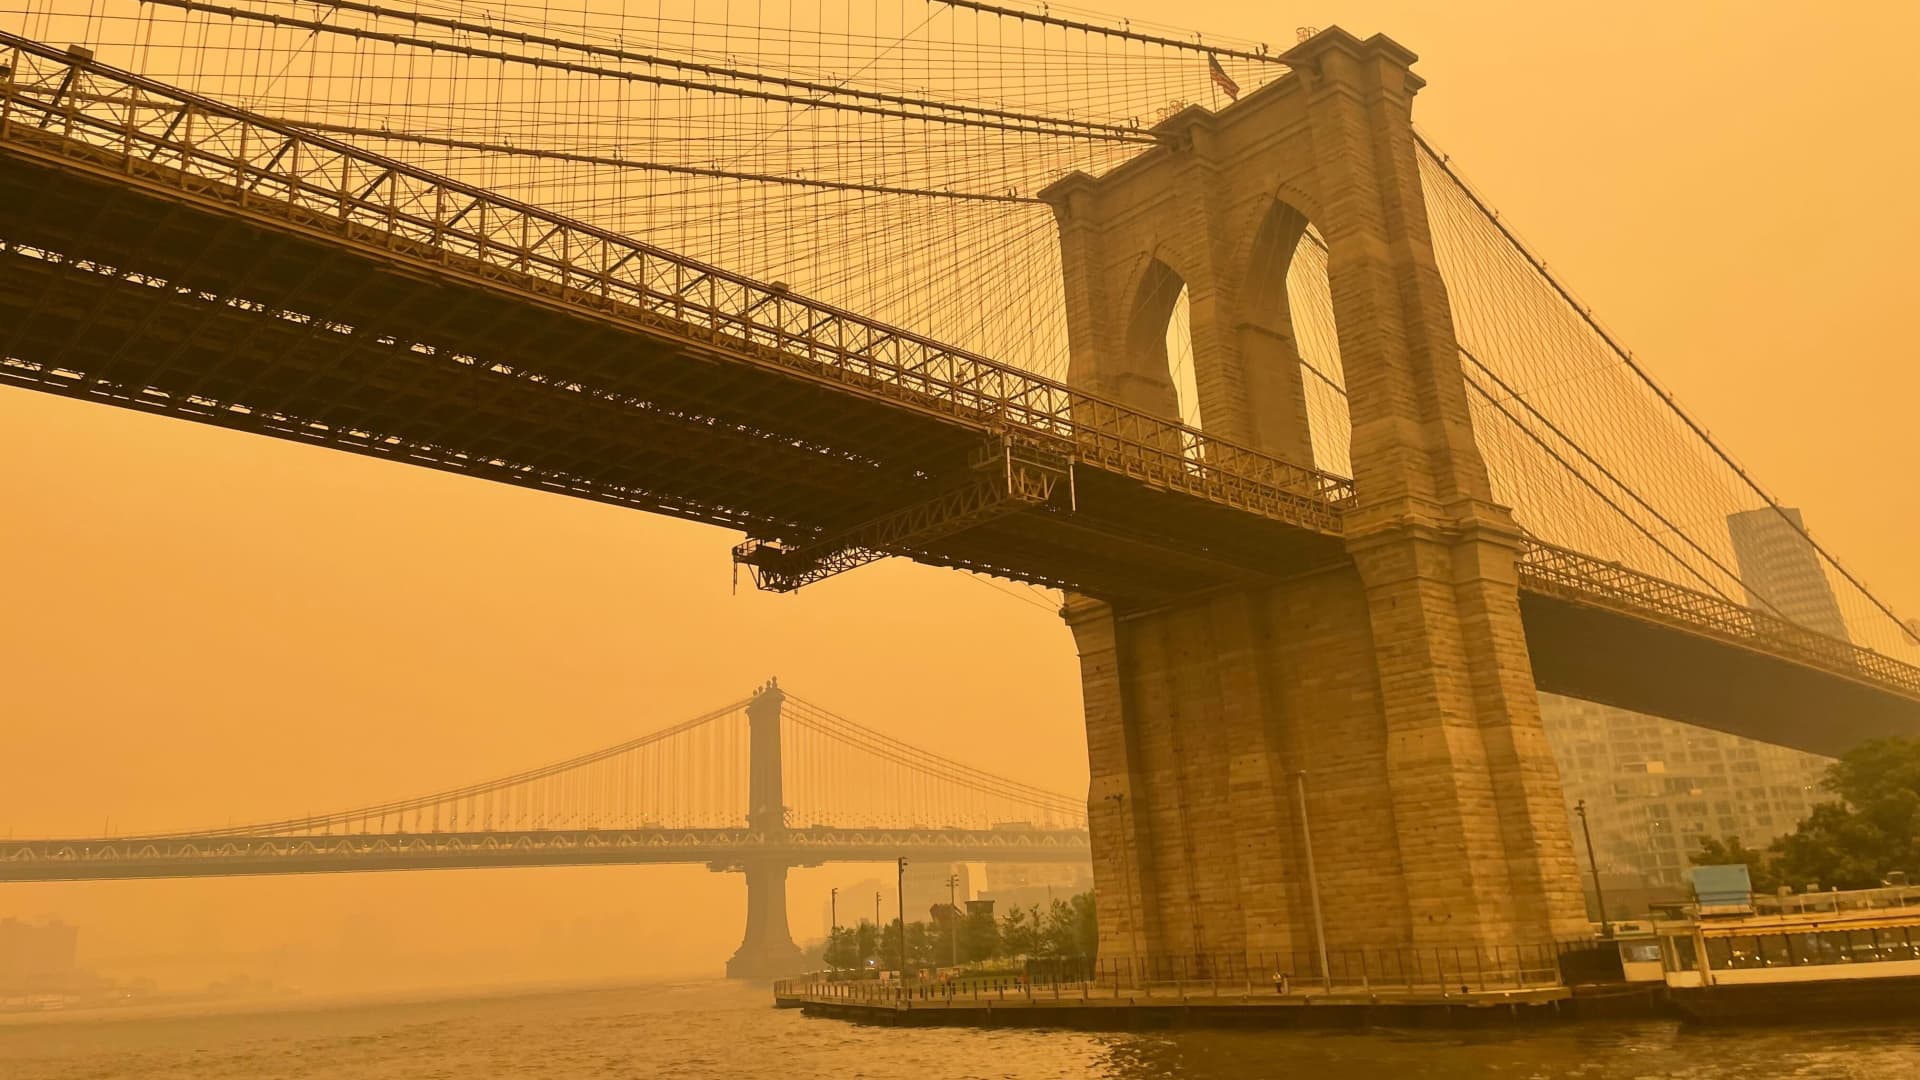 Google tells employees in New York and along the East Coast to work from home as wildfire smoke fills the air